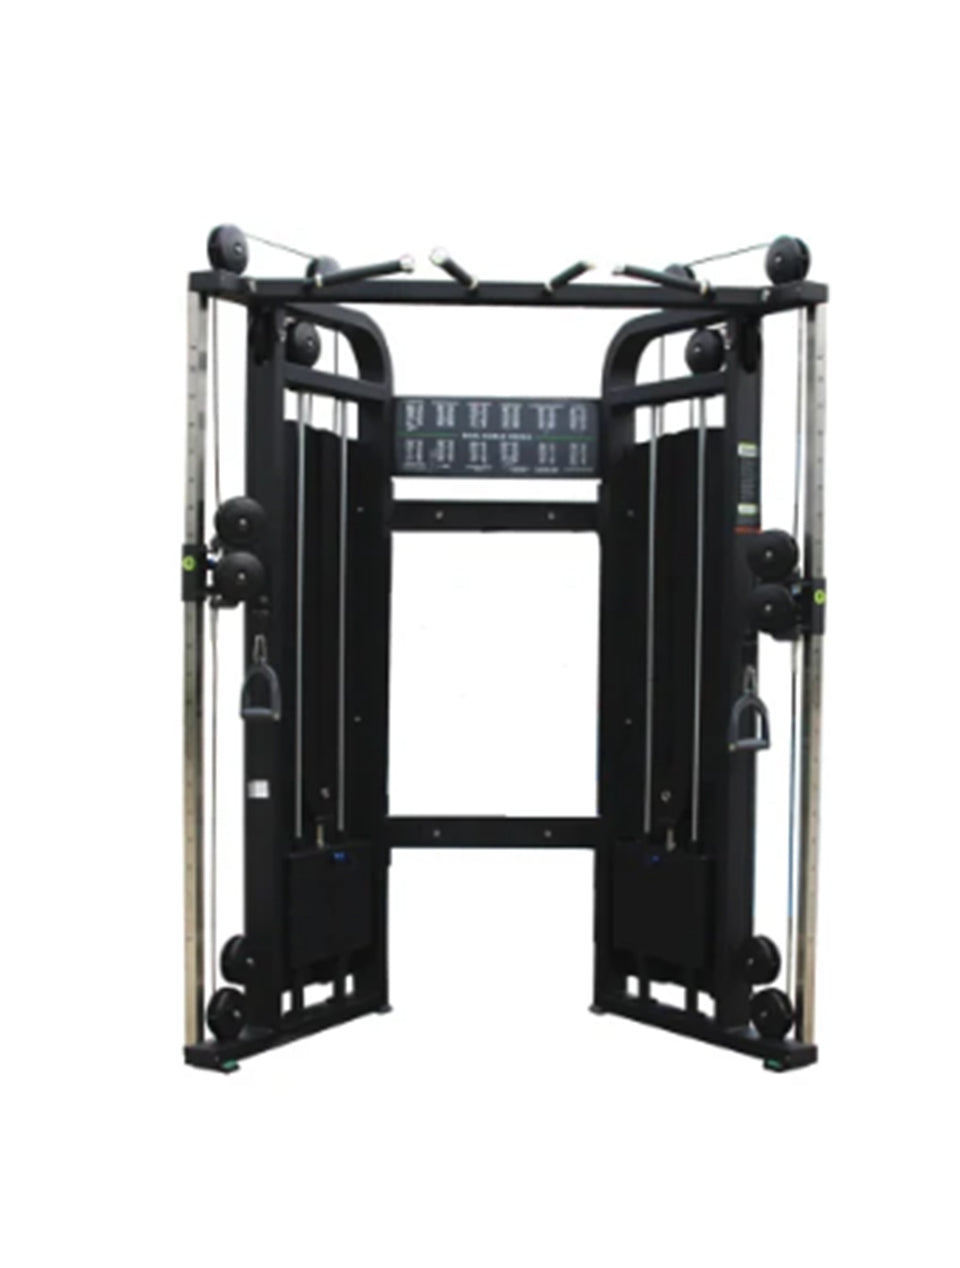 1441 Fitness  Dual Pulley Functional Trainer - 140 kg Weight Stack - G 13